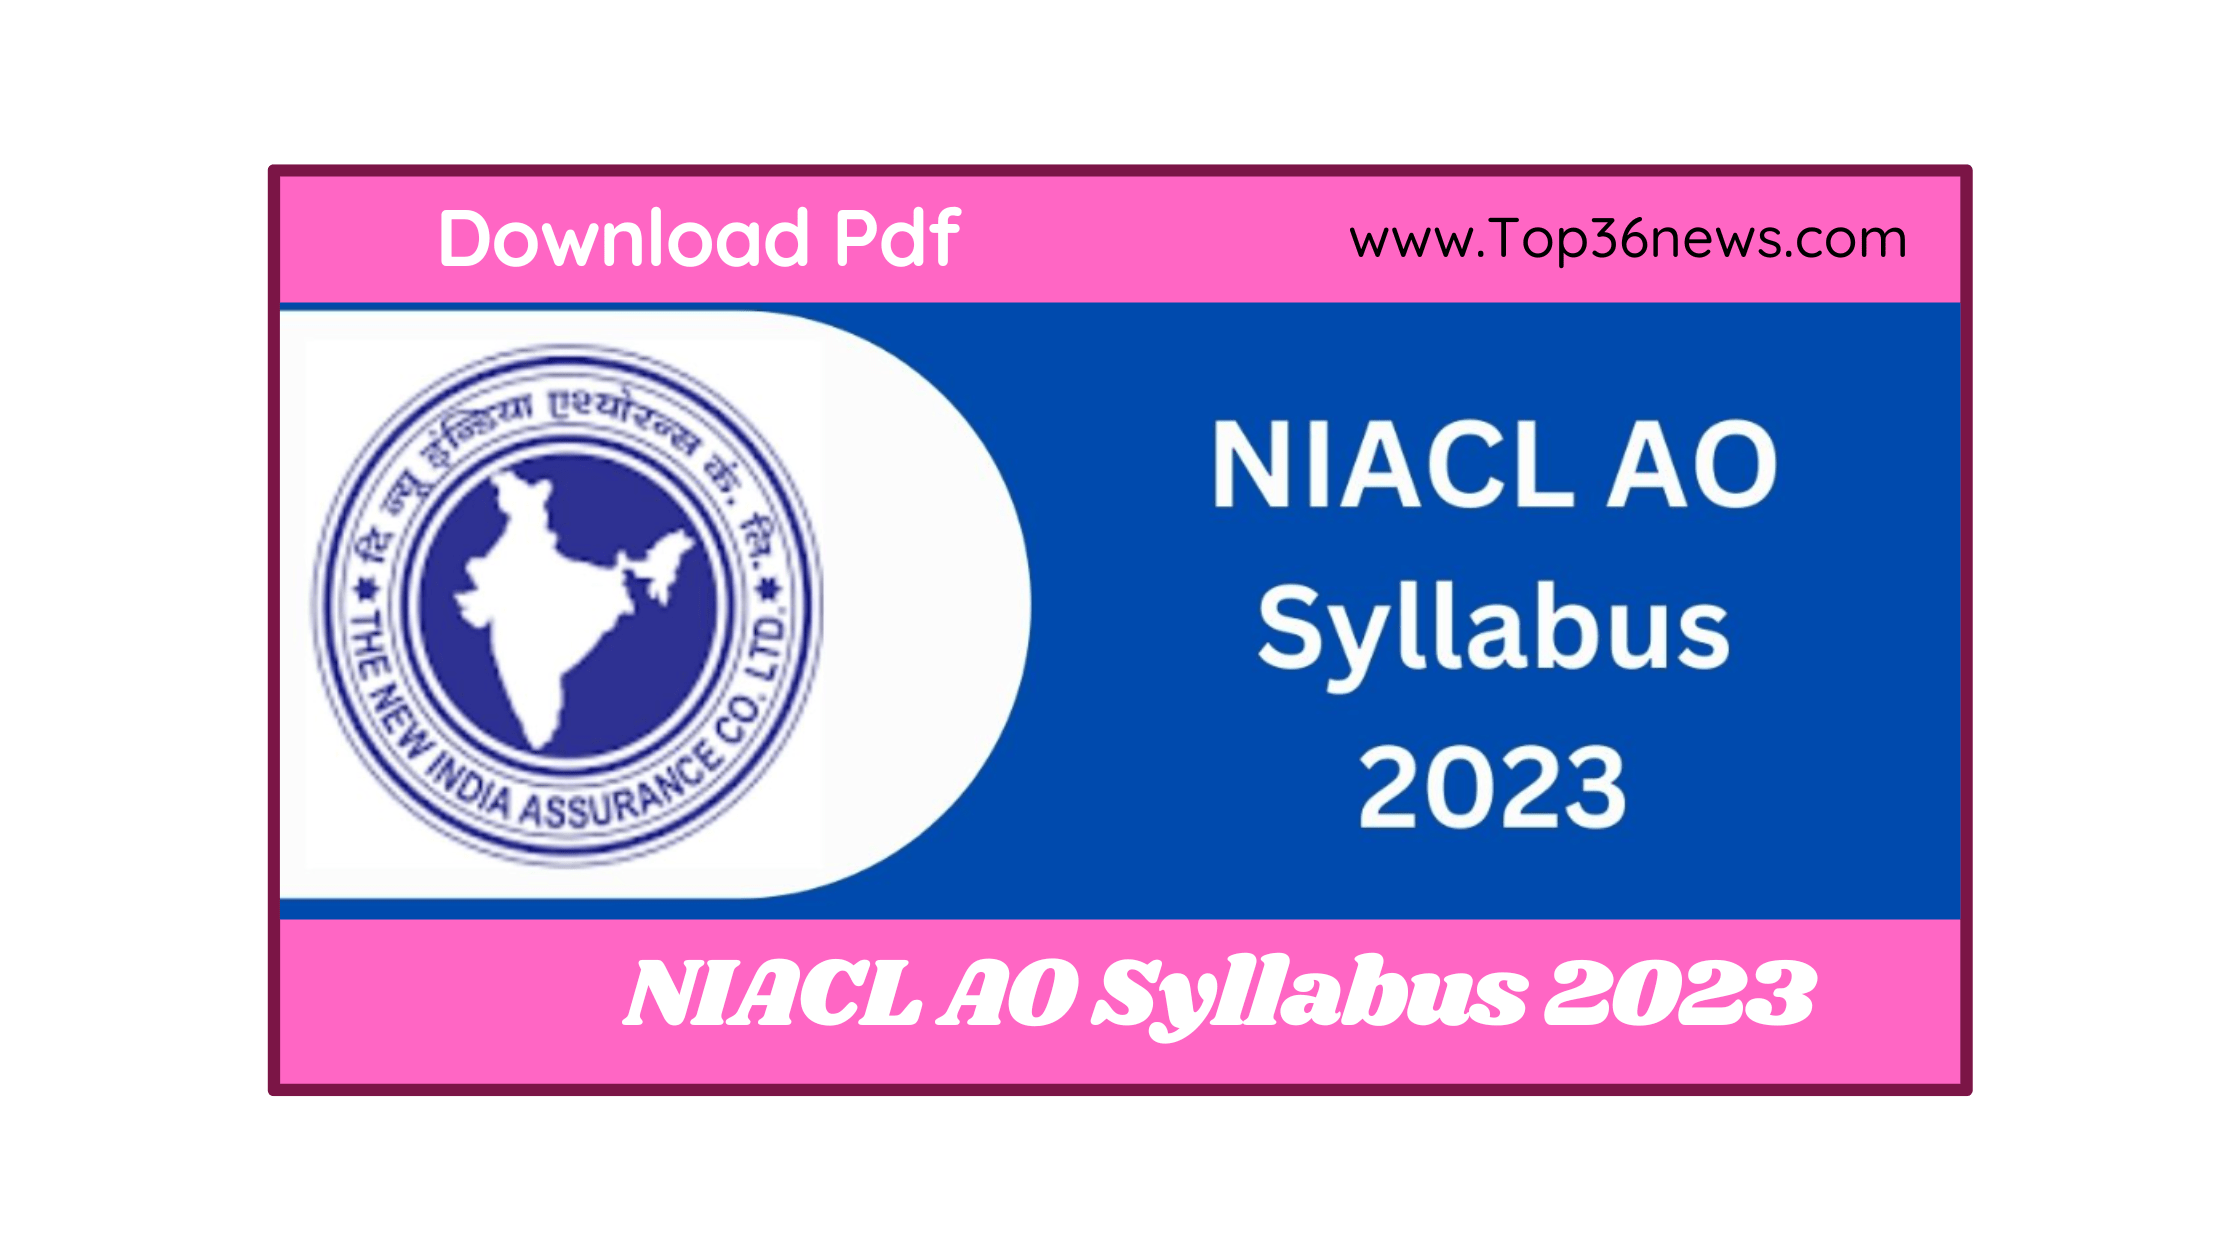 NIACL AO Syllabus 2023, Revised Exam Pattern Details